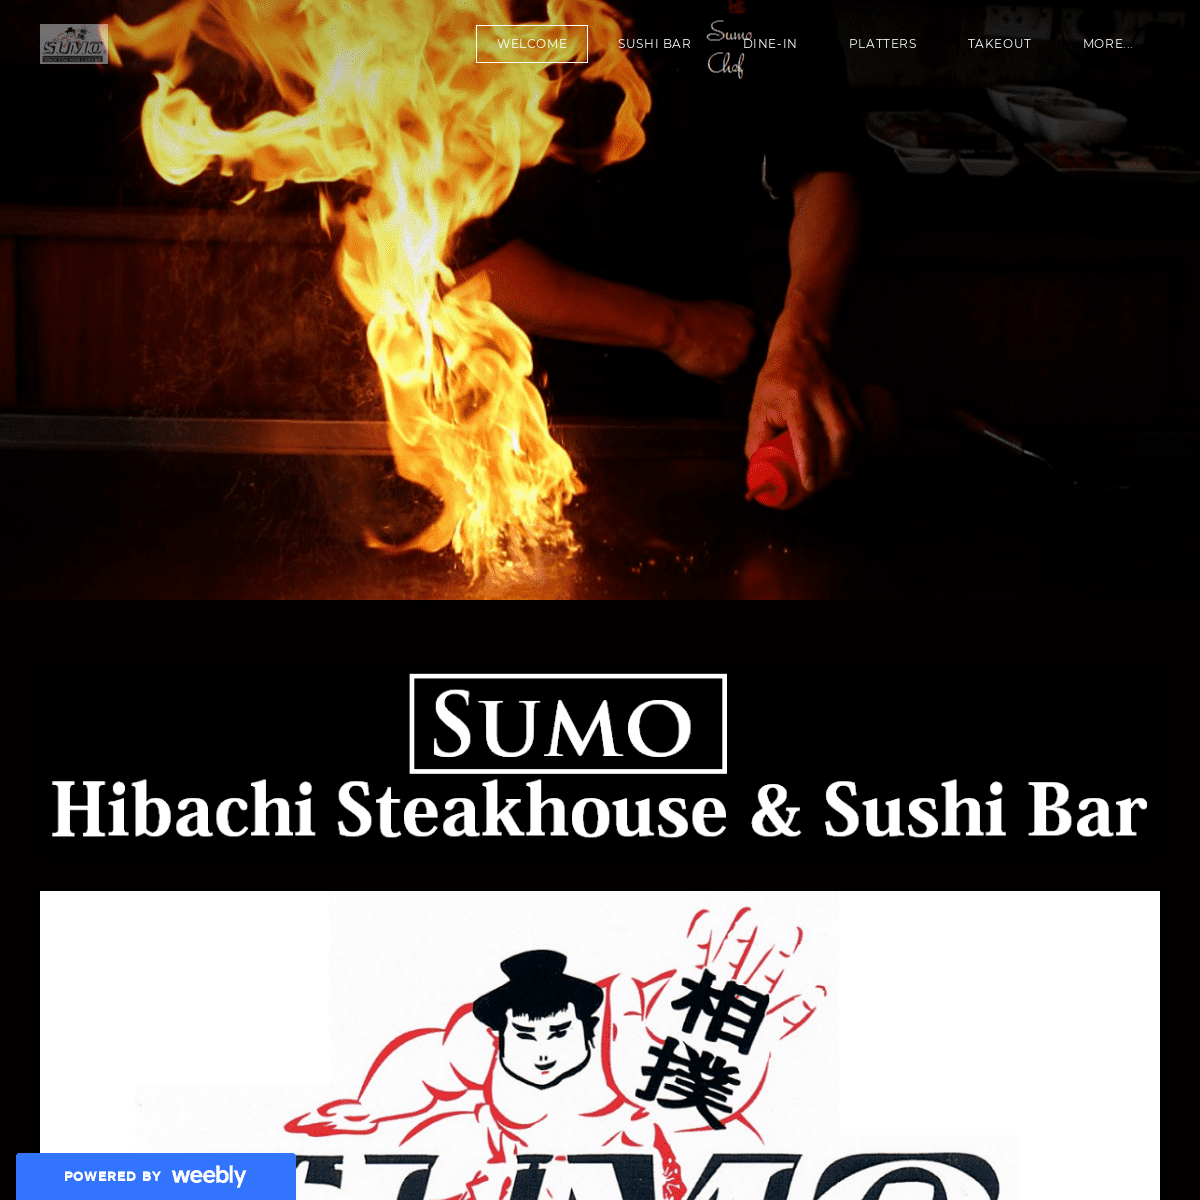 A complete backup of https://sumohibachisteakhouseandsushibar.weebly.com/